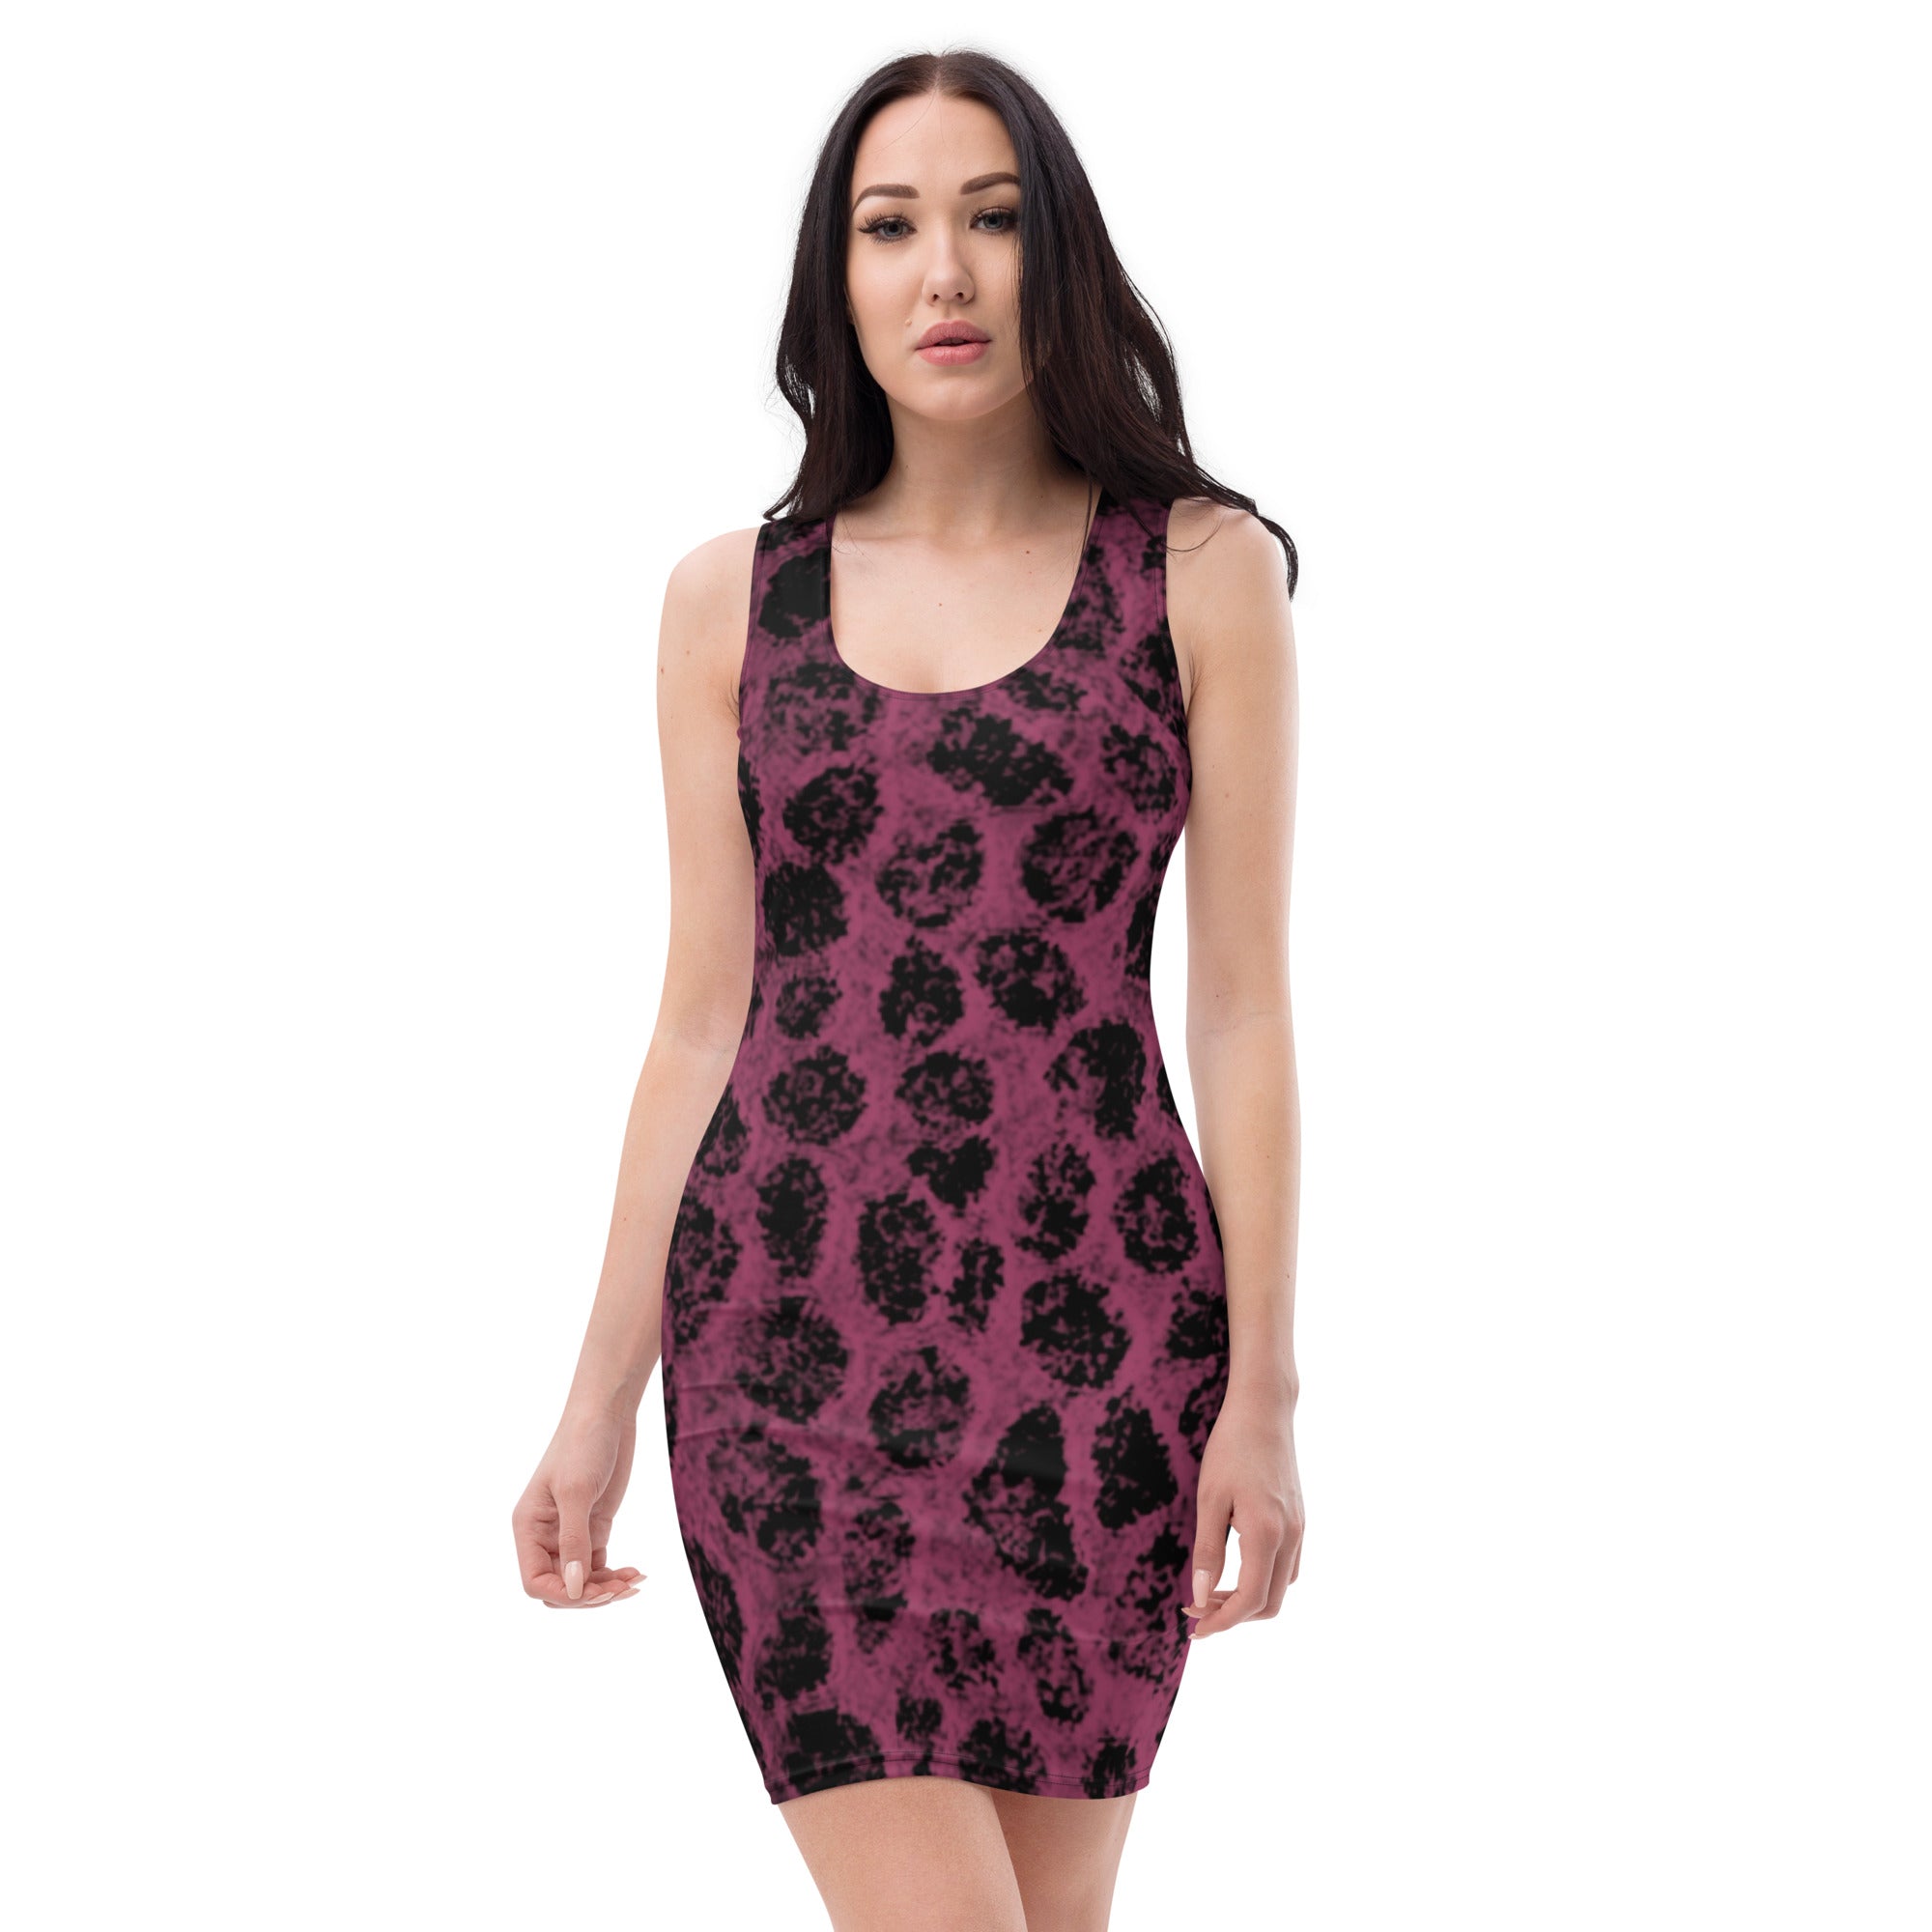 "Blossom Charm: Women's Spring and Summer Fashion Dress", lioness-love